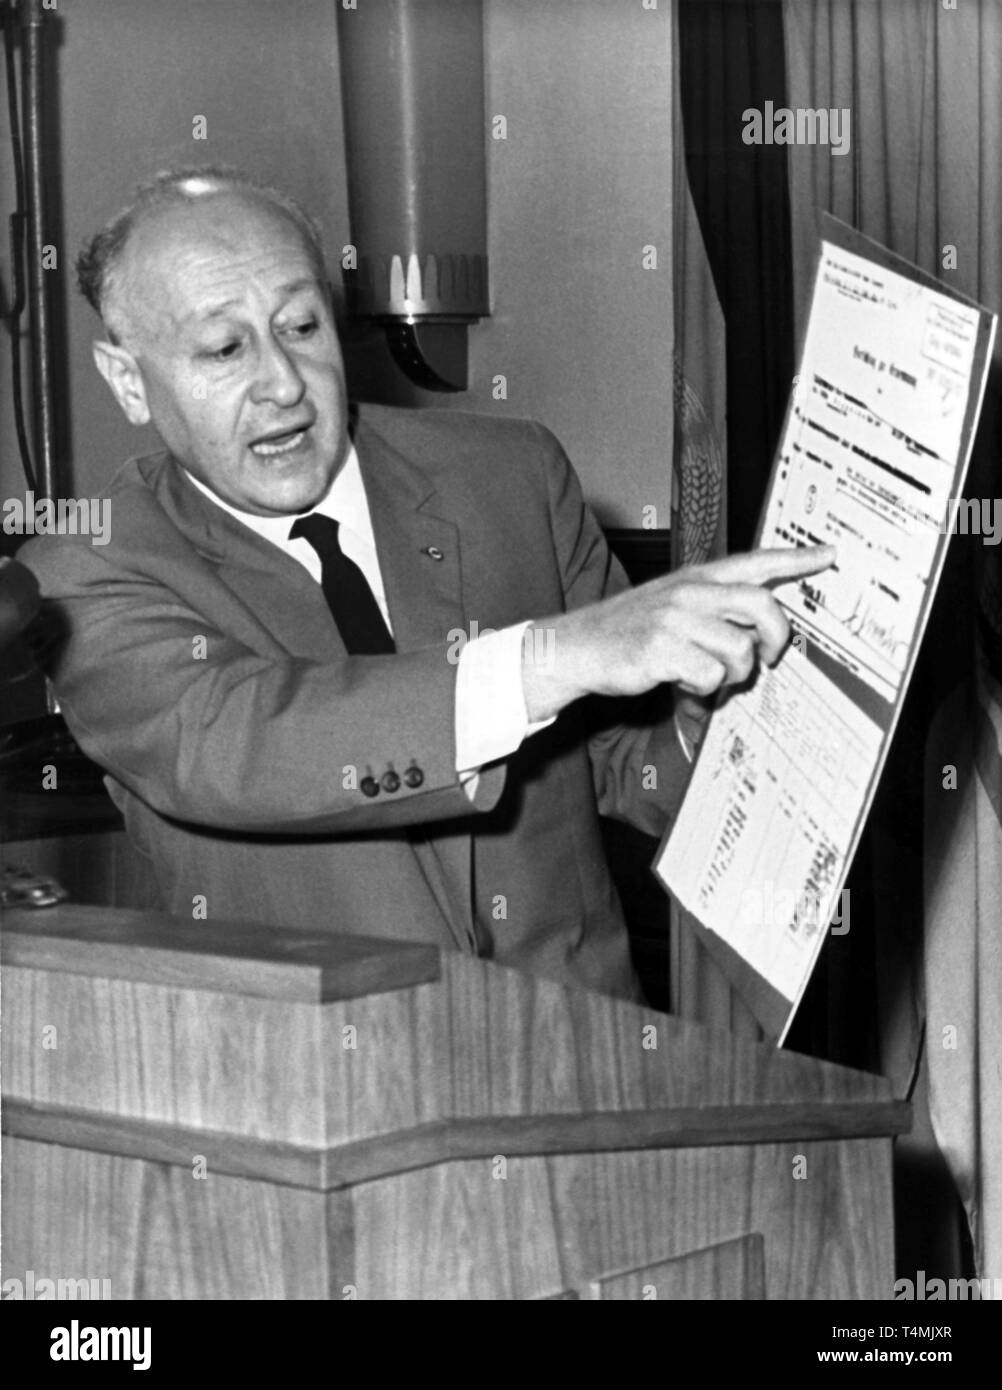 During a press conference on 31 August 1962, Albert Norden, member of the Politburo of the Central Committee of the SED and of the executive committee of the National Council of the National Front, presents documents which are to prove that former SS members hold high police offices in West Berlin. Norden had already published a book on war and Nazi criminals in 1956 which contains some 1800 biographies of former nazis and war criminals holding leading positions in West Germany. Photo: Schneider /ADN Zentralbild | usage worldwide Stock Photo